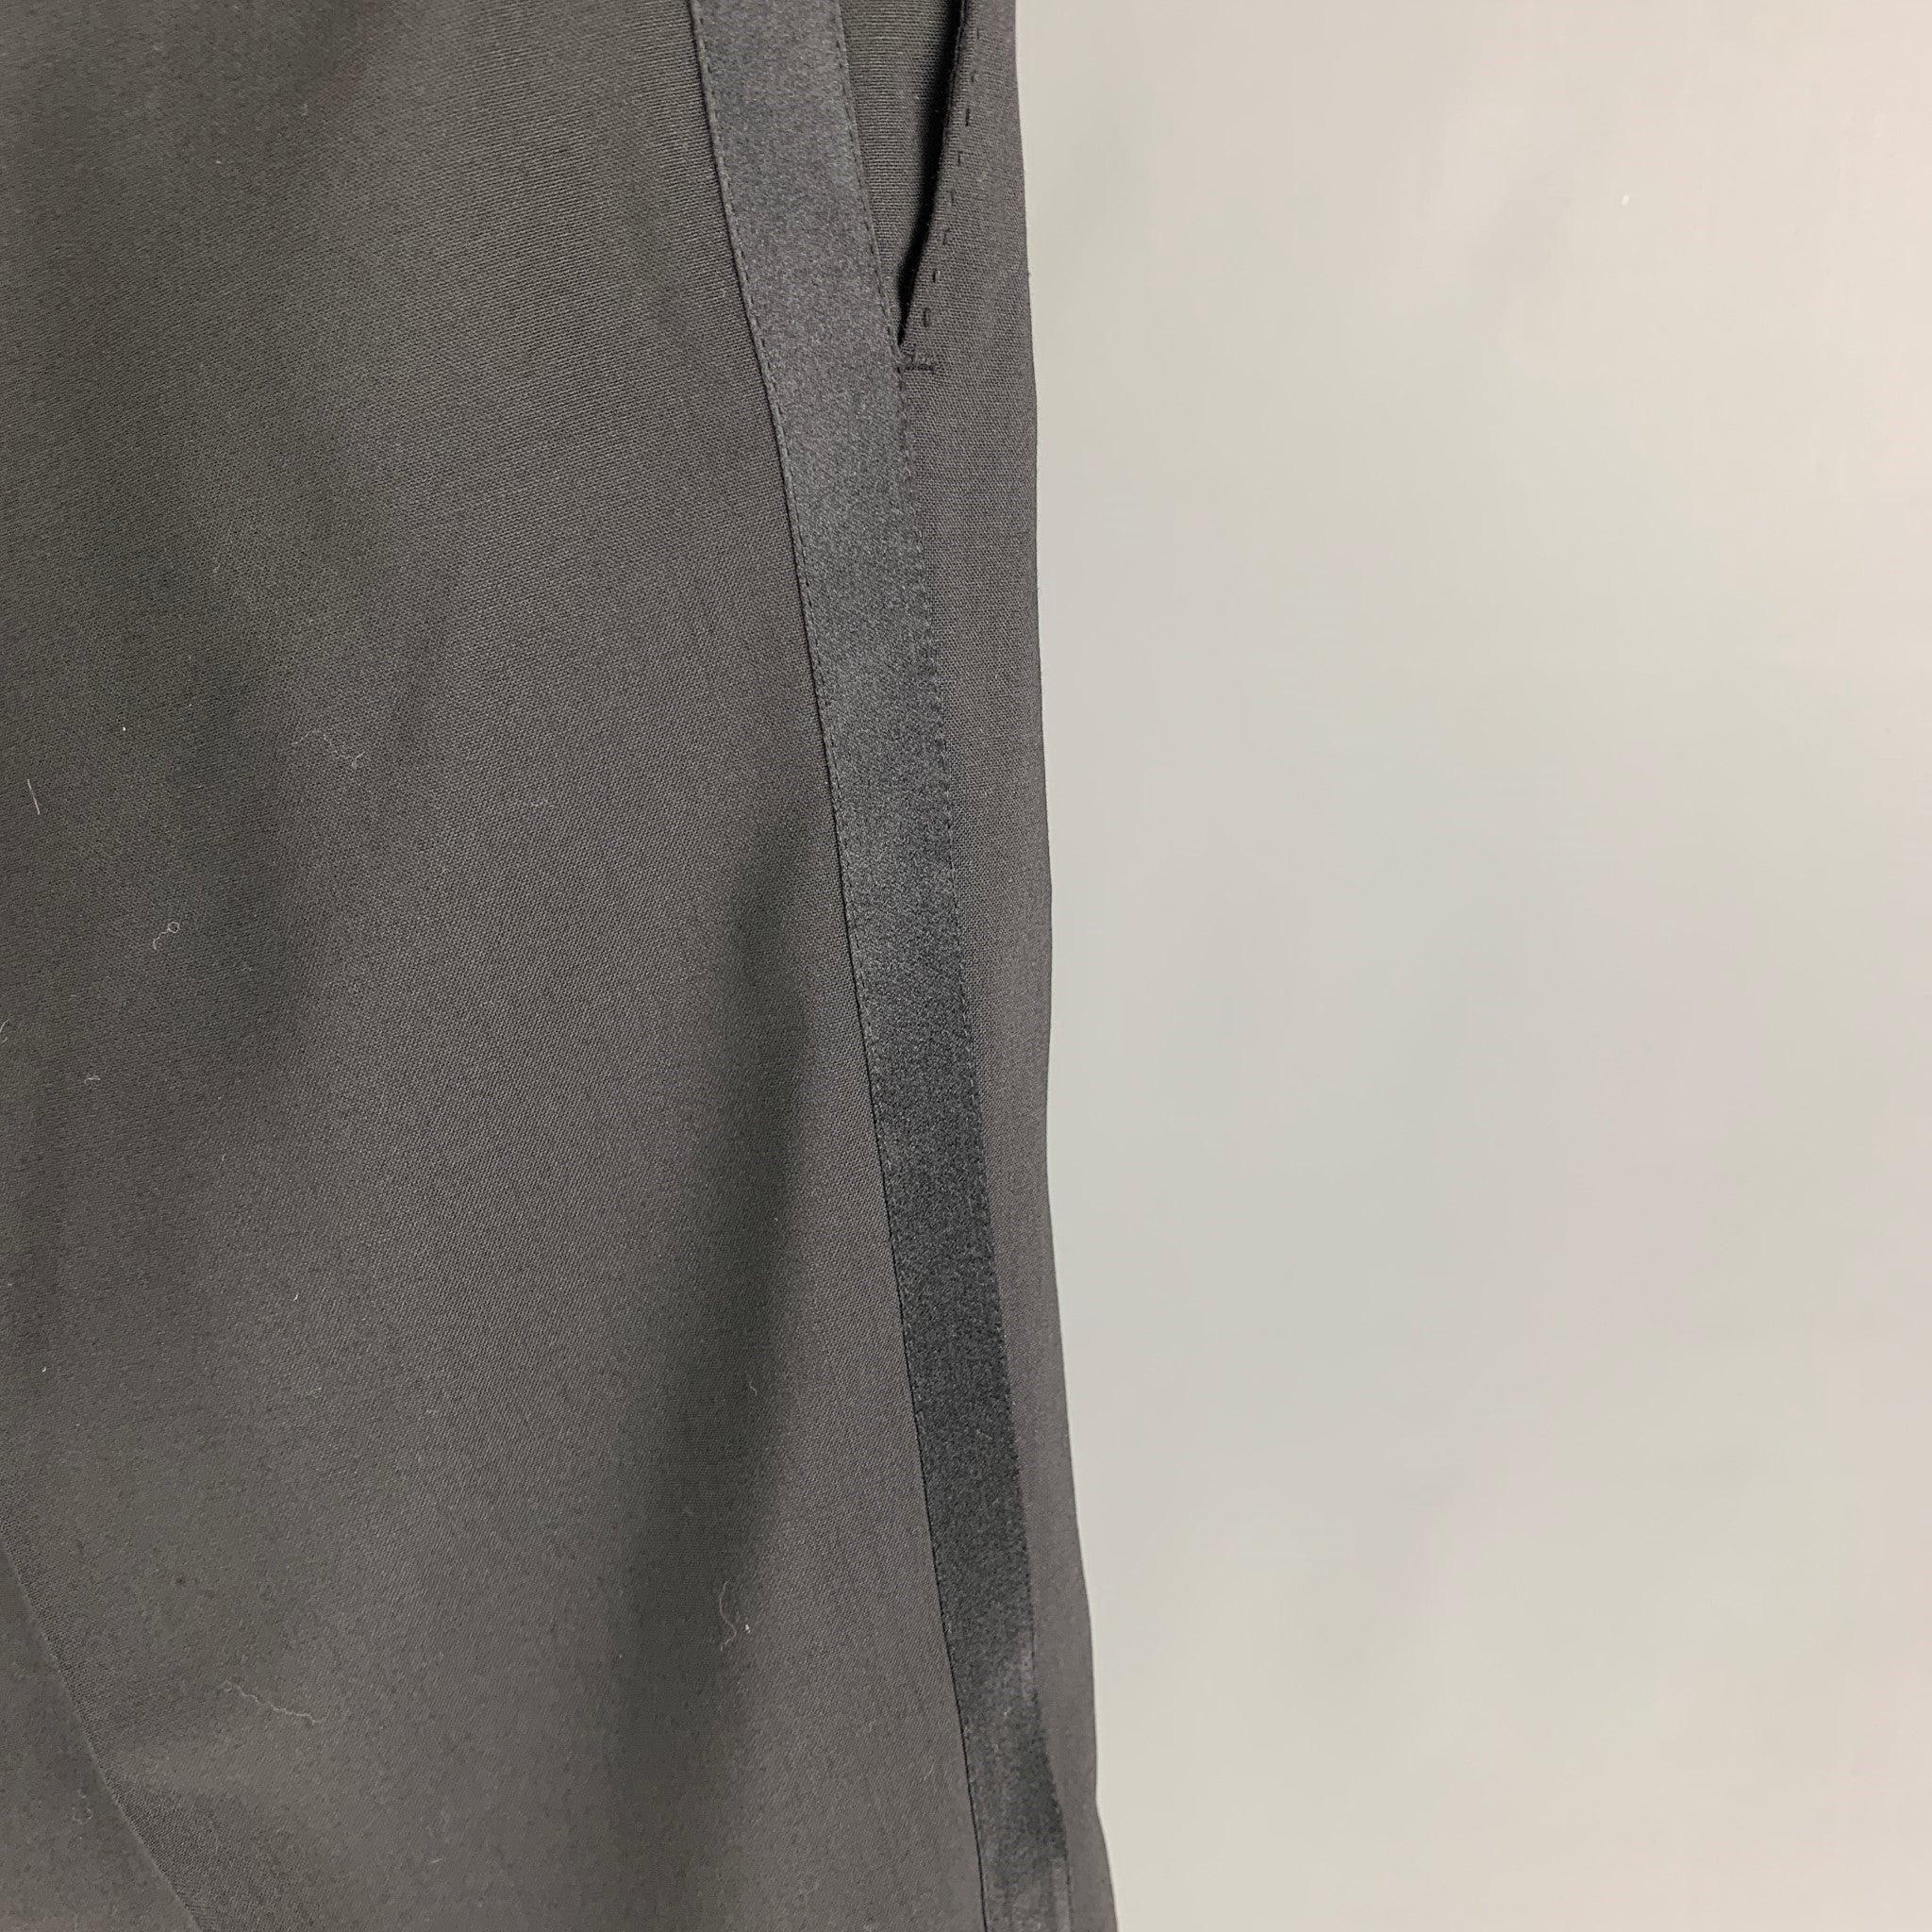 DOLCE & GABBANA tuxedo dress pants comes in a black wool blend featuring a flat front, stripe trim, and a zip fly closure. Made in Italy.
Very Good
Pre-Owned Condition. 

Marked:   54 

Measurements: 
  Waist: 38 inches  Rise: 9.5 inches  Inseam: 28